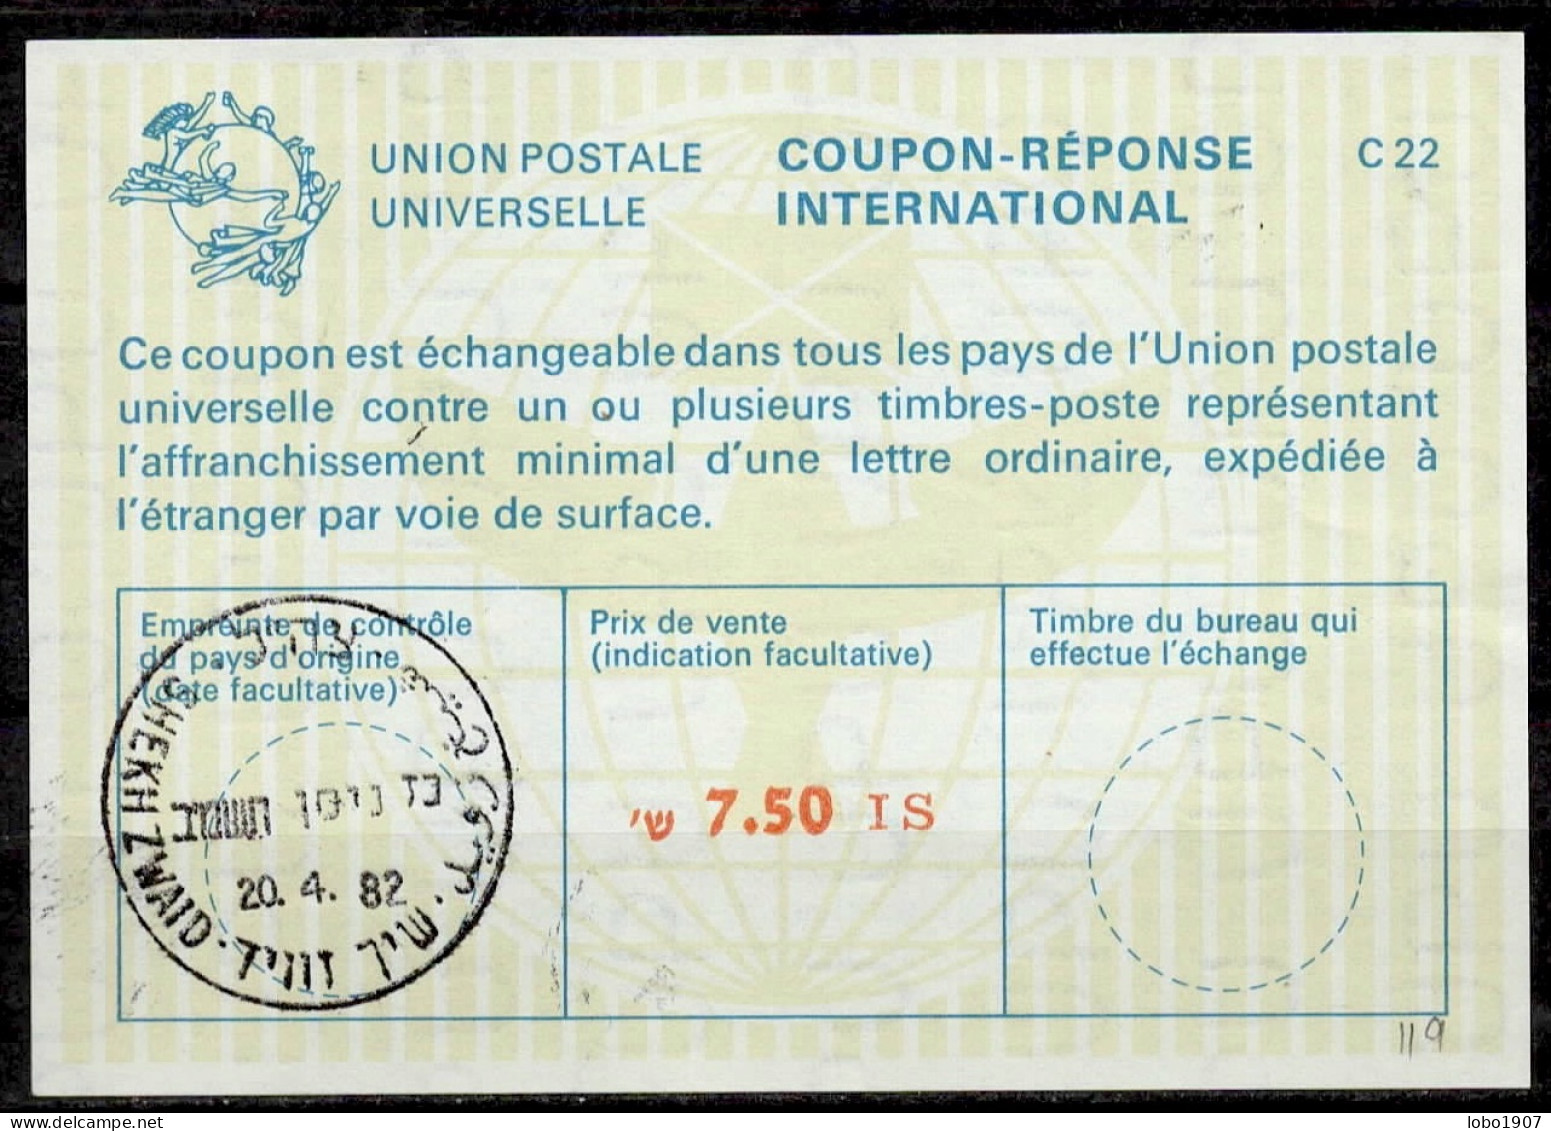 SINAI EGYPT Palestine 1979-1982  Collection 9 International Reply Coupon Reponse Antwortschein IAS IRC  see scans